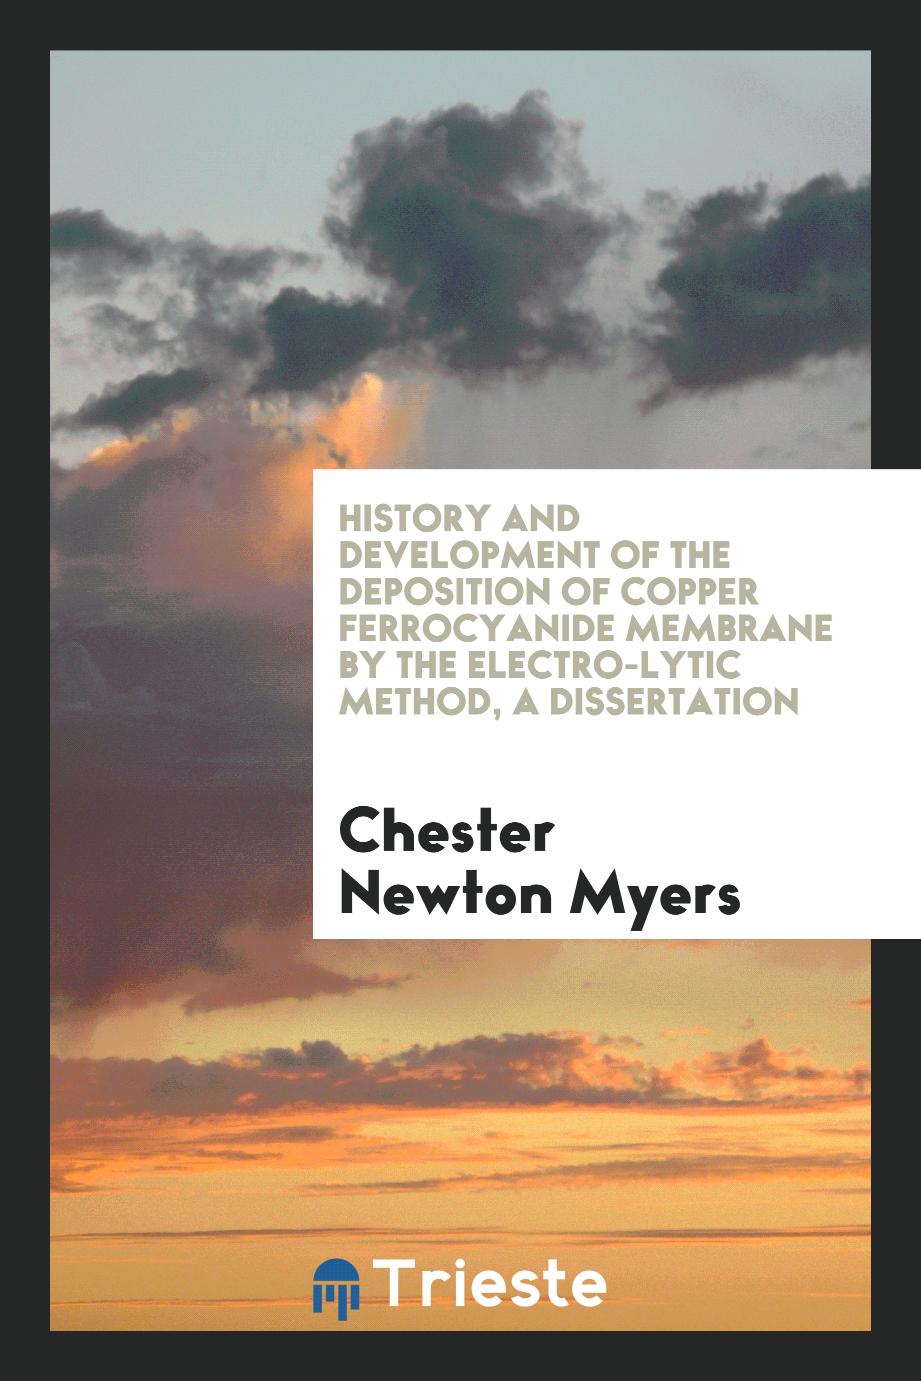 History and Development of the Deposition of Copper Ferrocyanide Membrane by the Electro-lytic Method, a dissertation